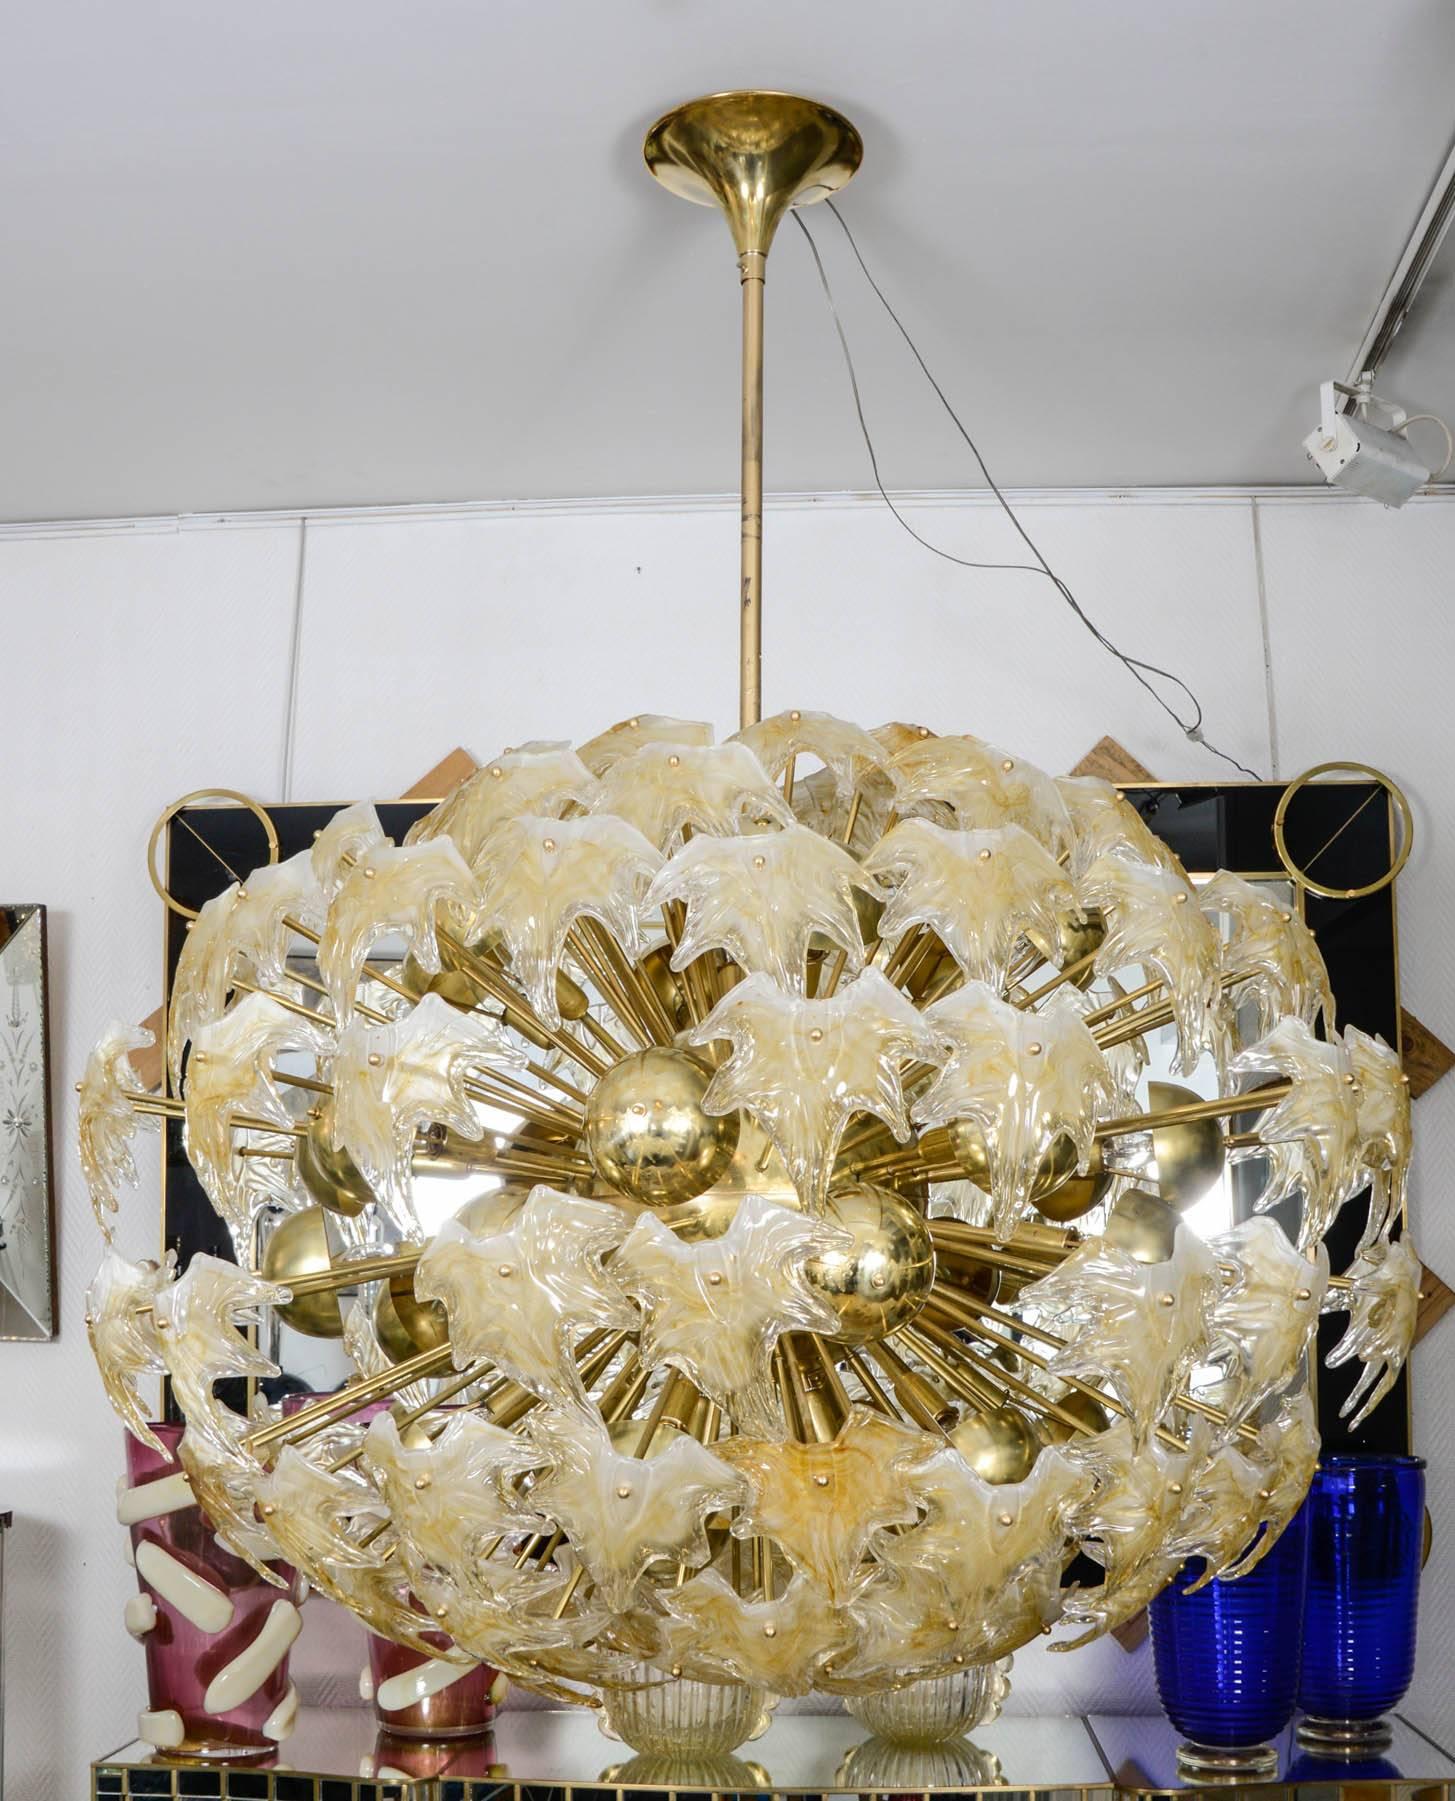 Chandelier with leaves in Murano glass.